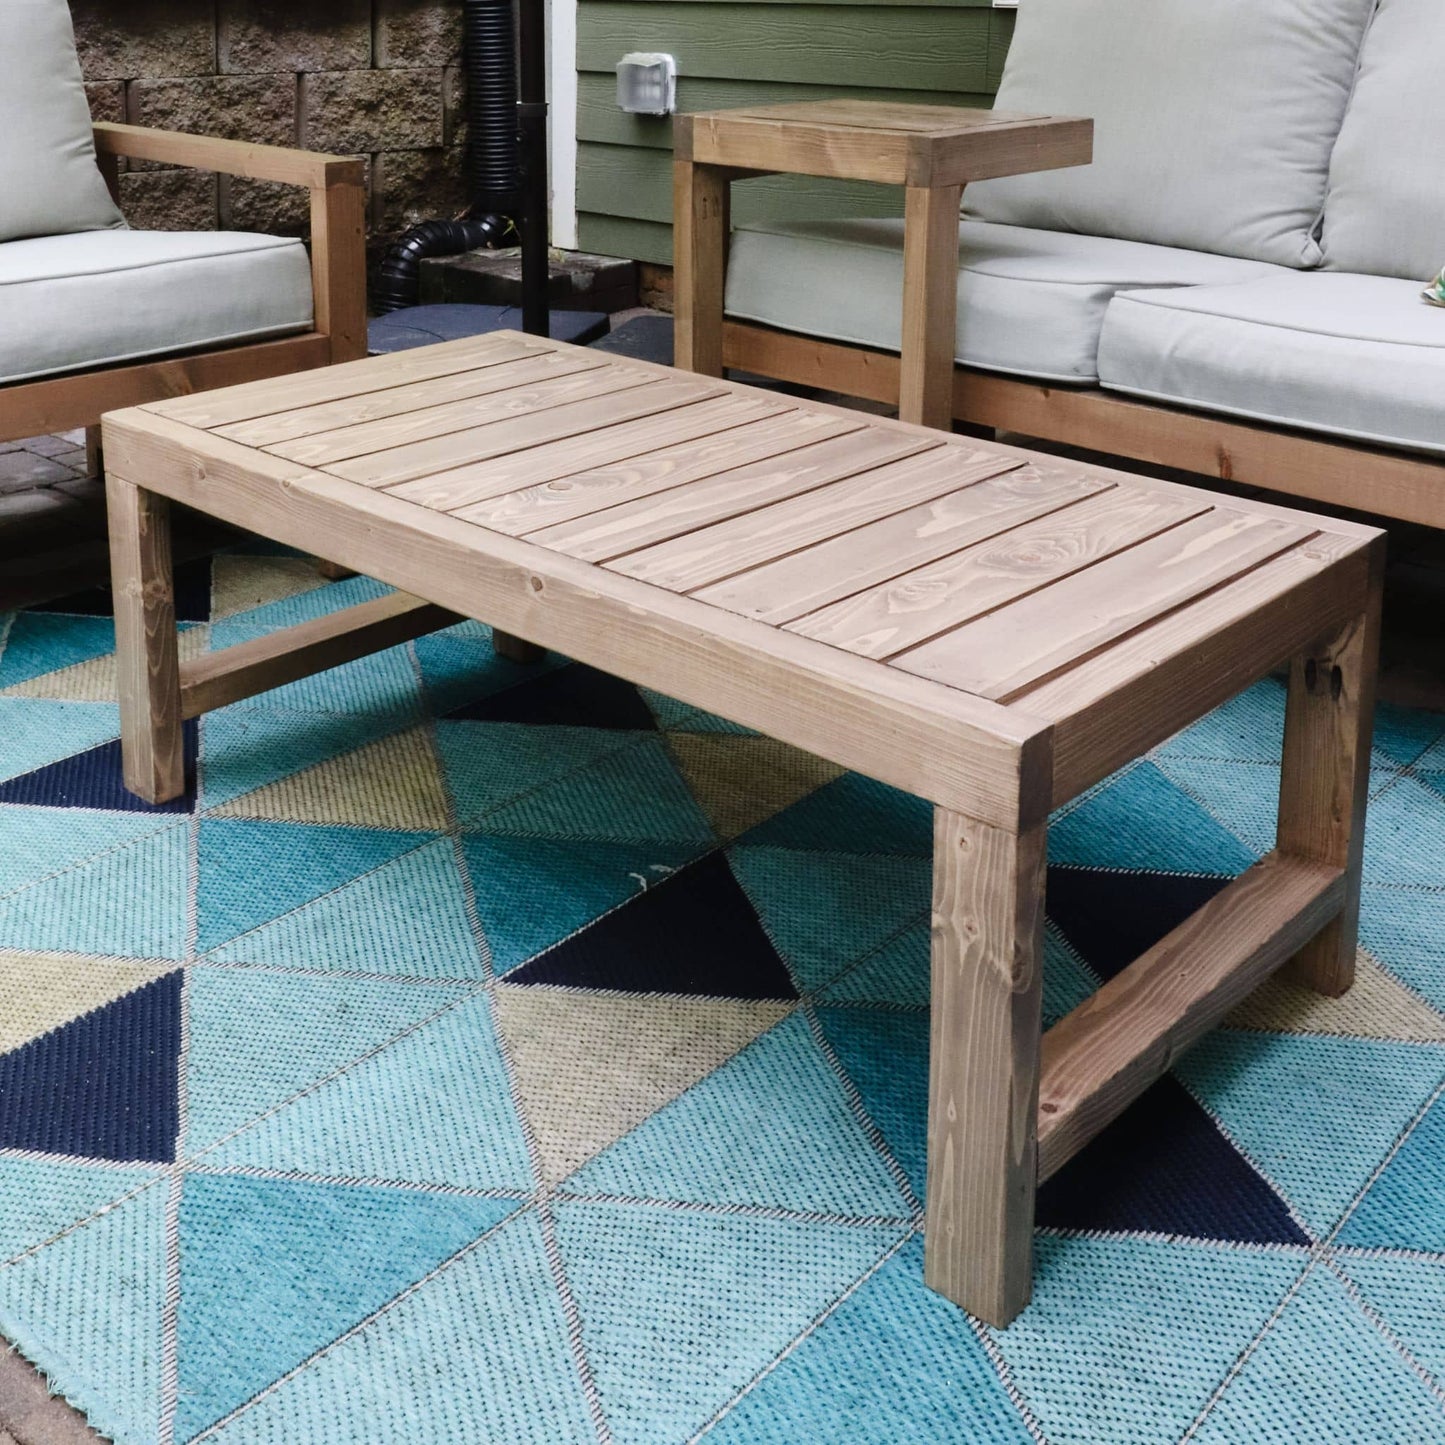 Outdoor Coffee Table Printable Plans